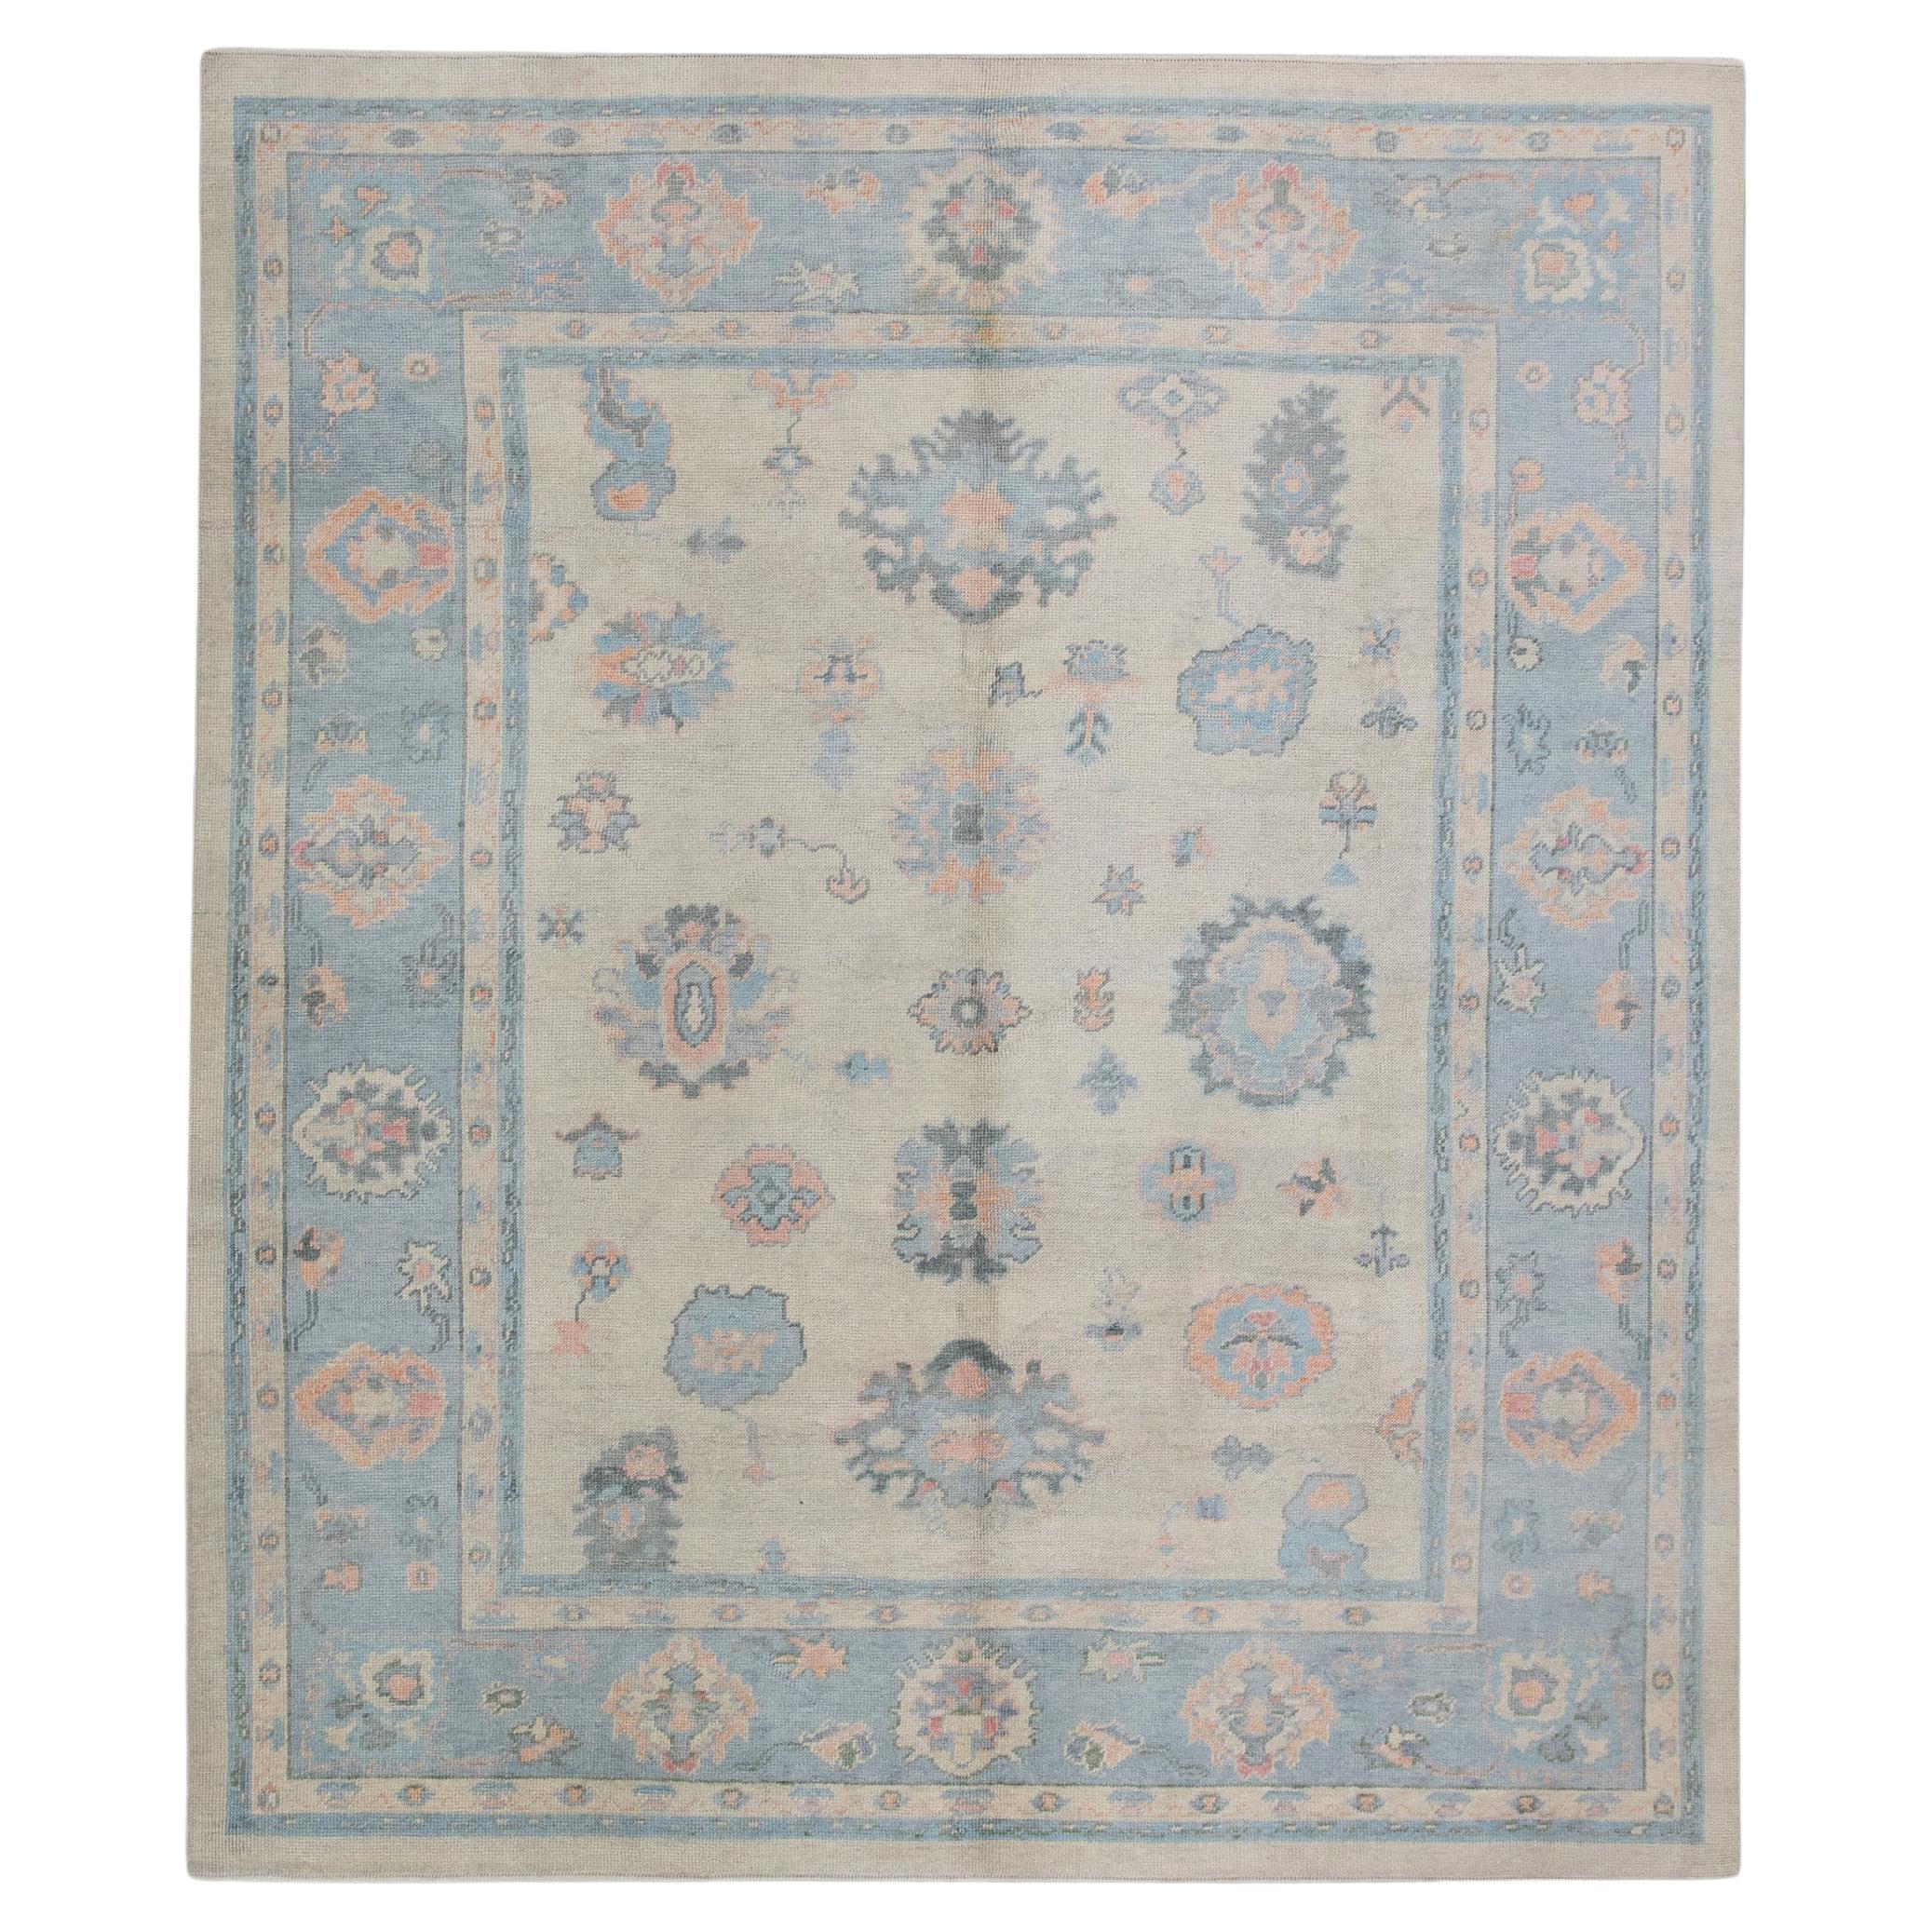 Handwoven Wool Turkish Oushak Rug in Blue & Salmon Floral Pattern 8'3" x 9'9" For Sale